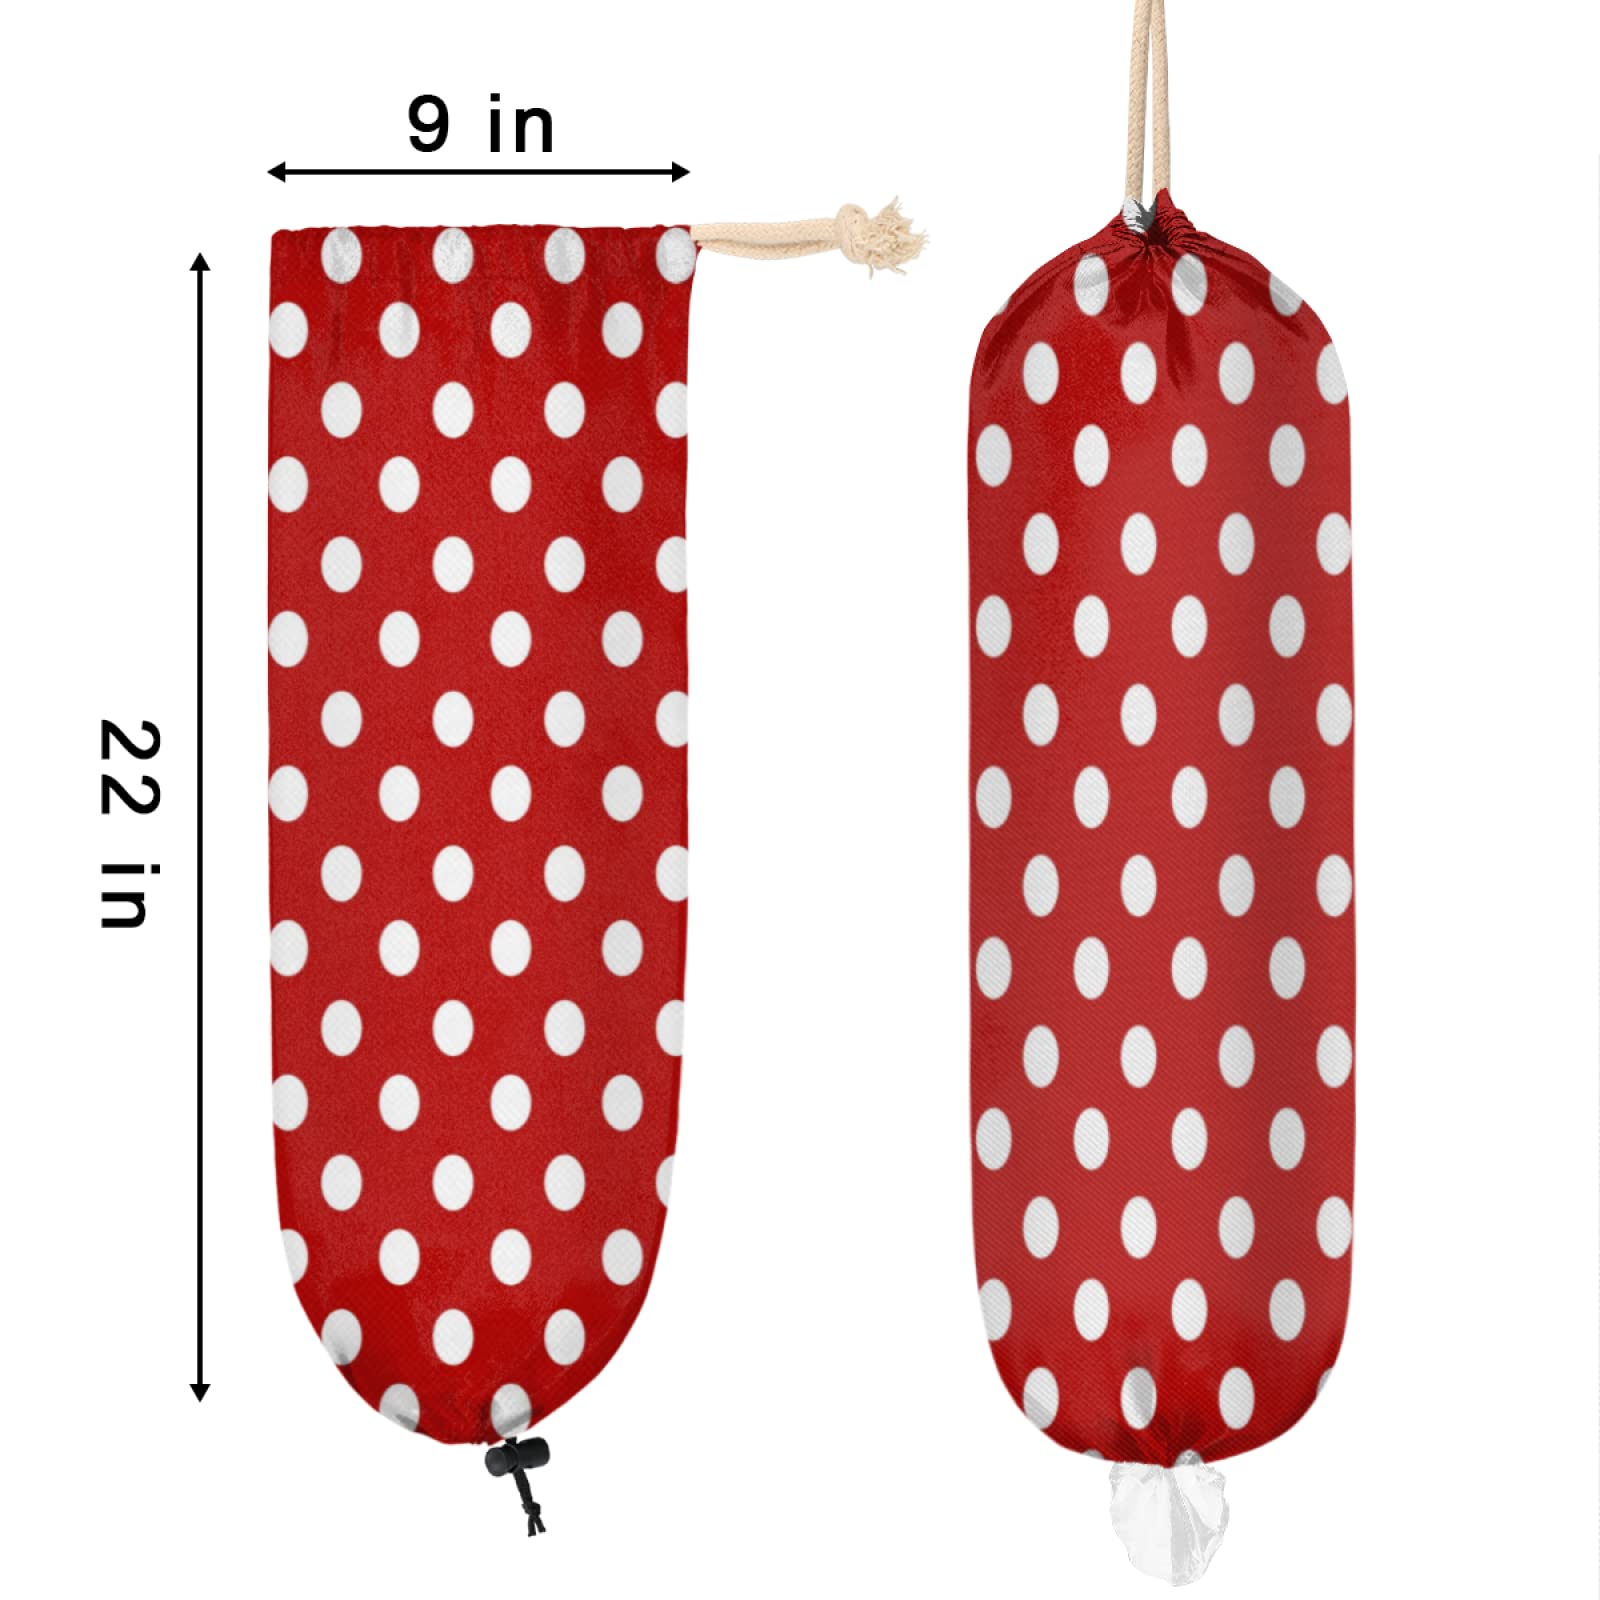 Polka Dot Red Plastic Bag Holder, Polka Dot Pattern Wall Mount Plastic Bag Organizer with Drawstring Grocery Shopping Bags Storage Dispenser for Home Kitchen Farmhouse Decor, 22X9 Inch